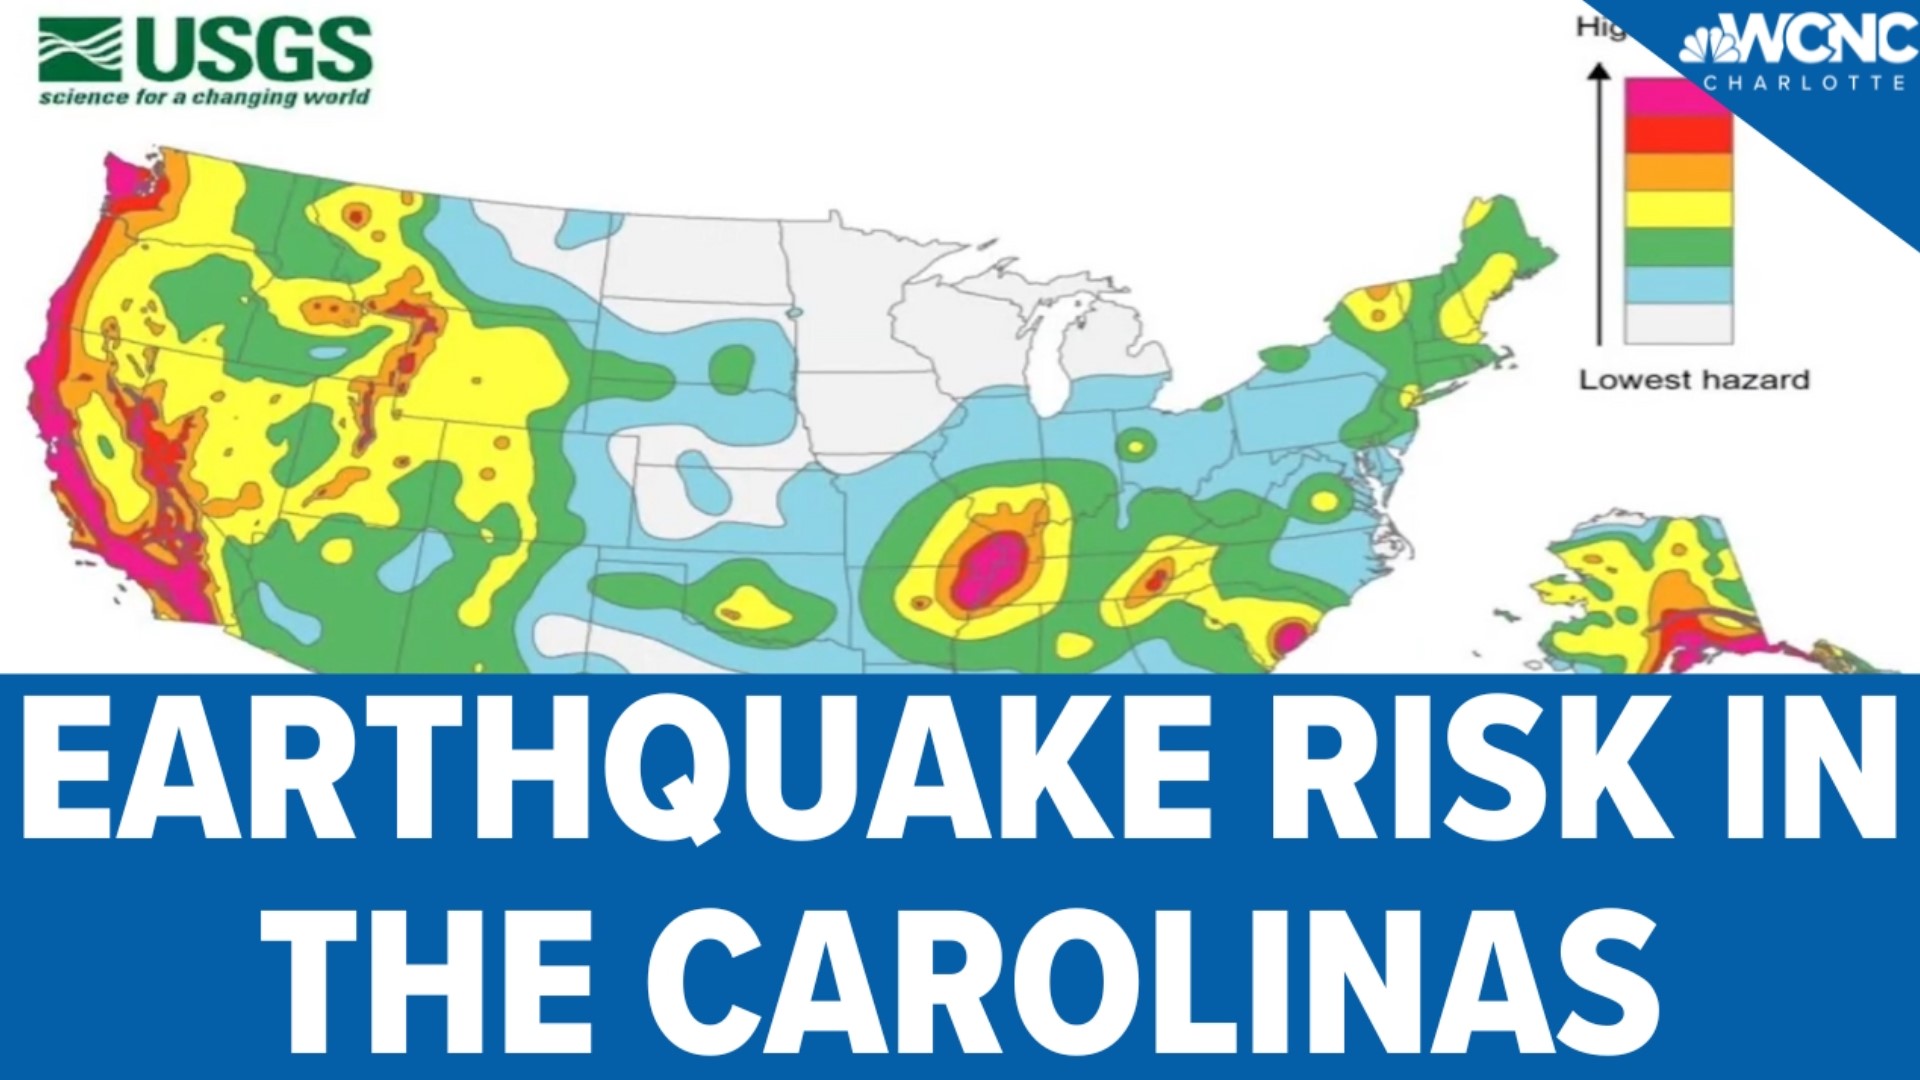 KJ Jacobs examines the risks of earthquakes here in the Carolinas.